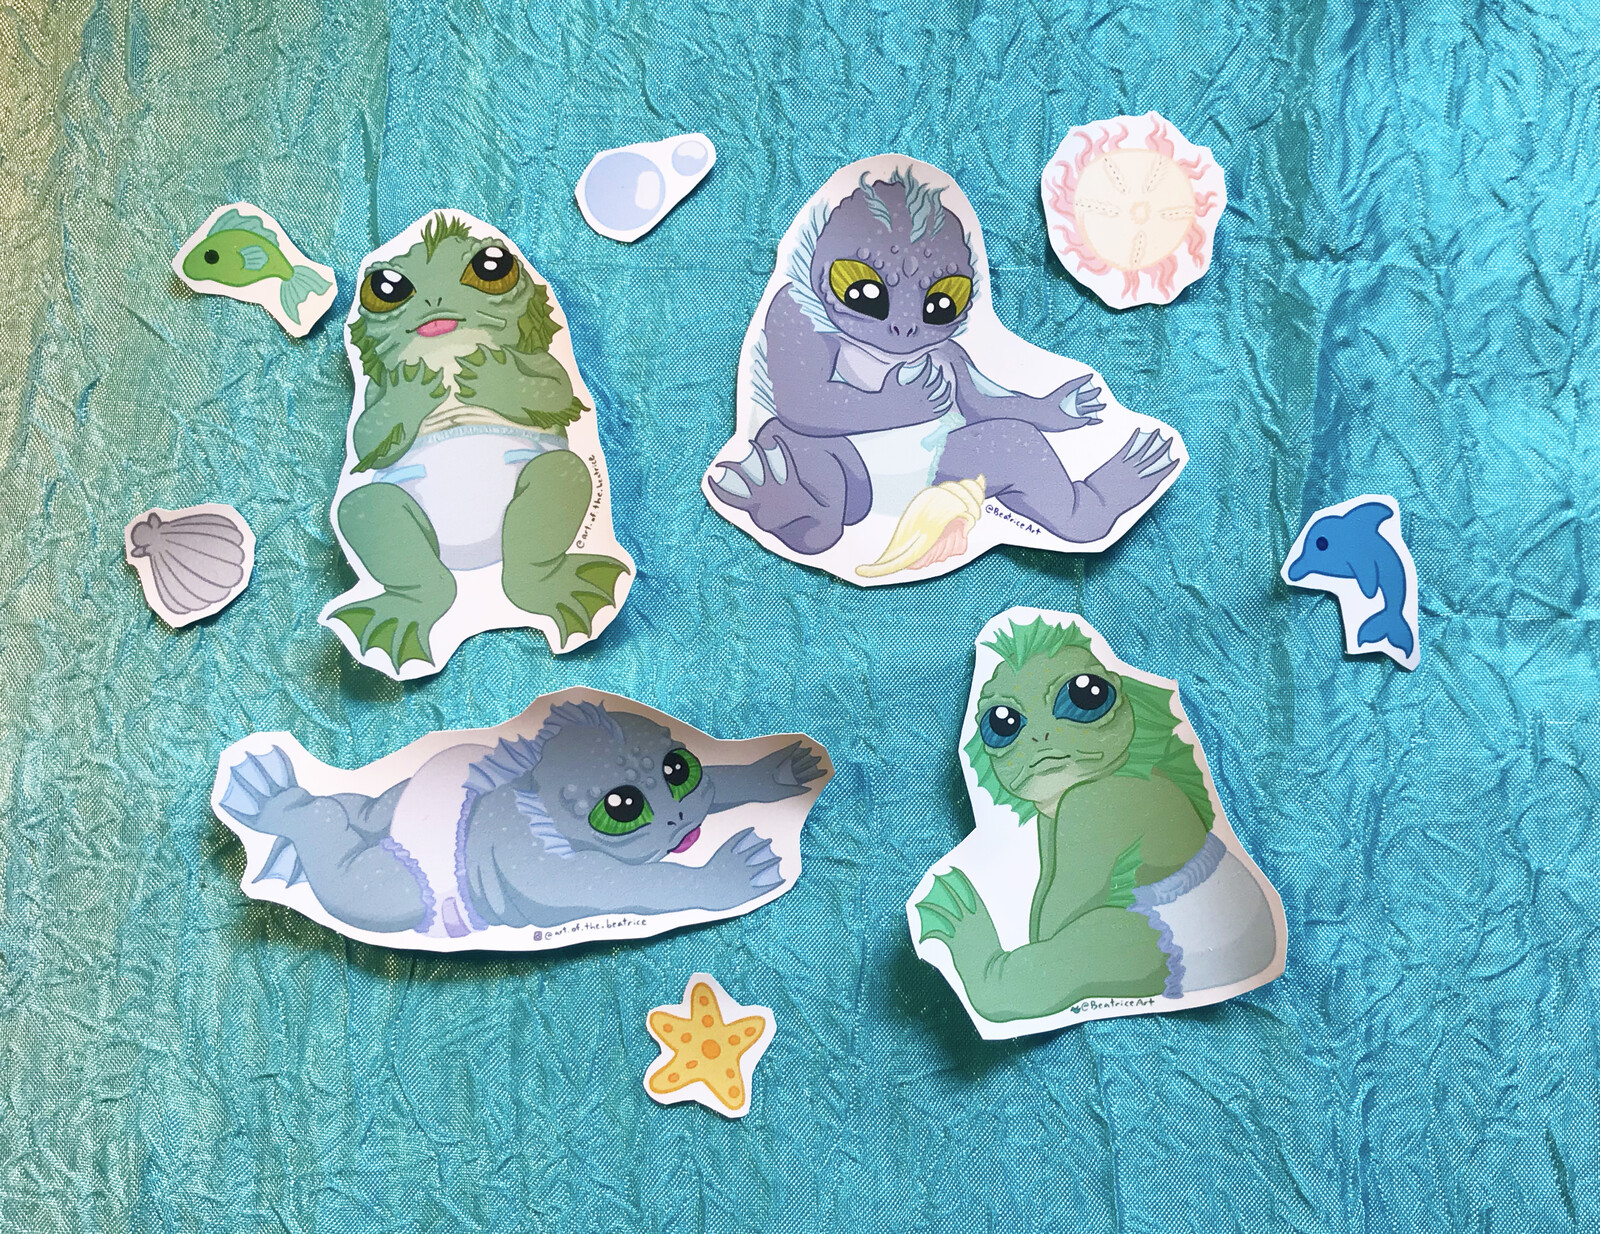 the full set of all 4 fishbabies